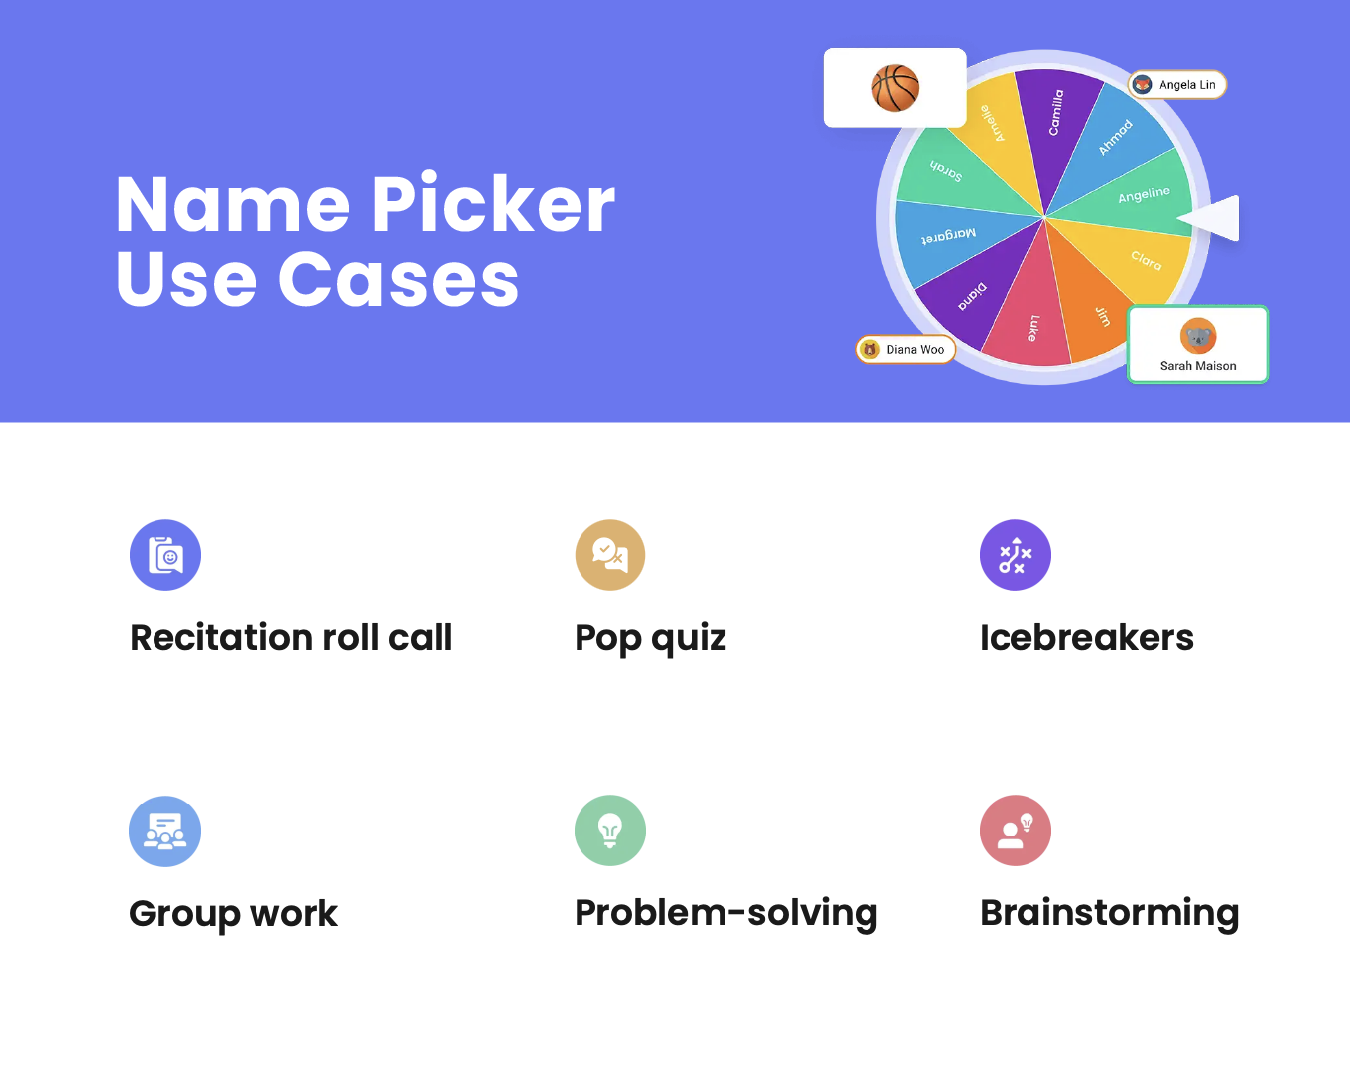 Name Picker Use Cases